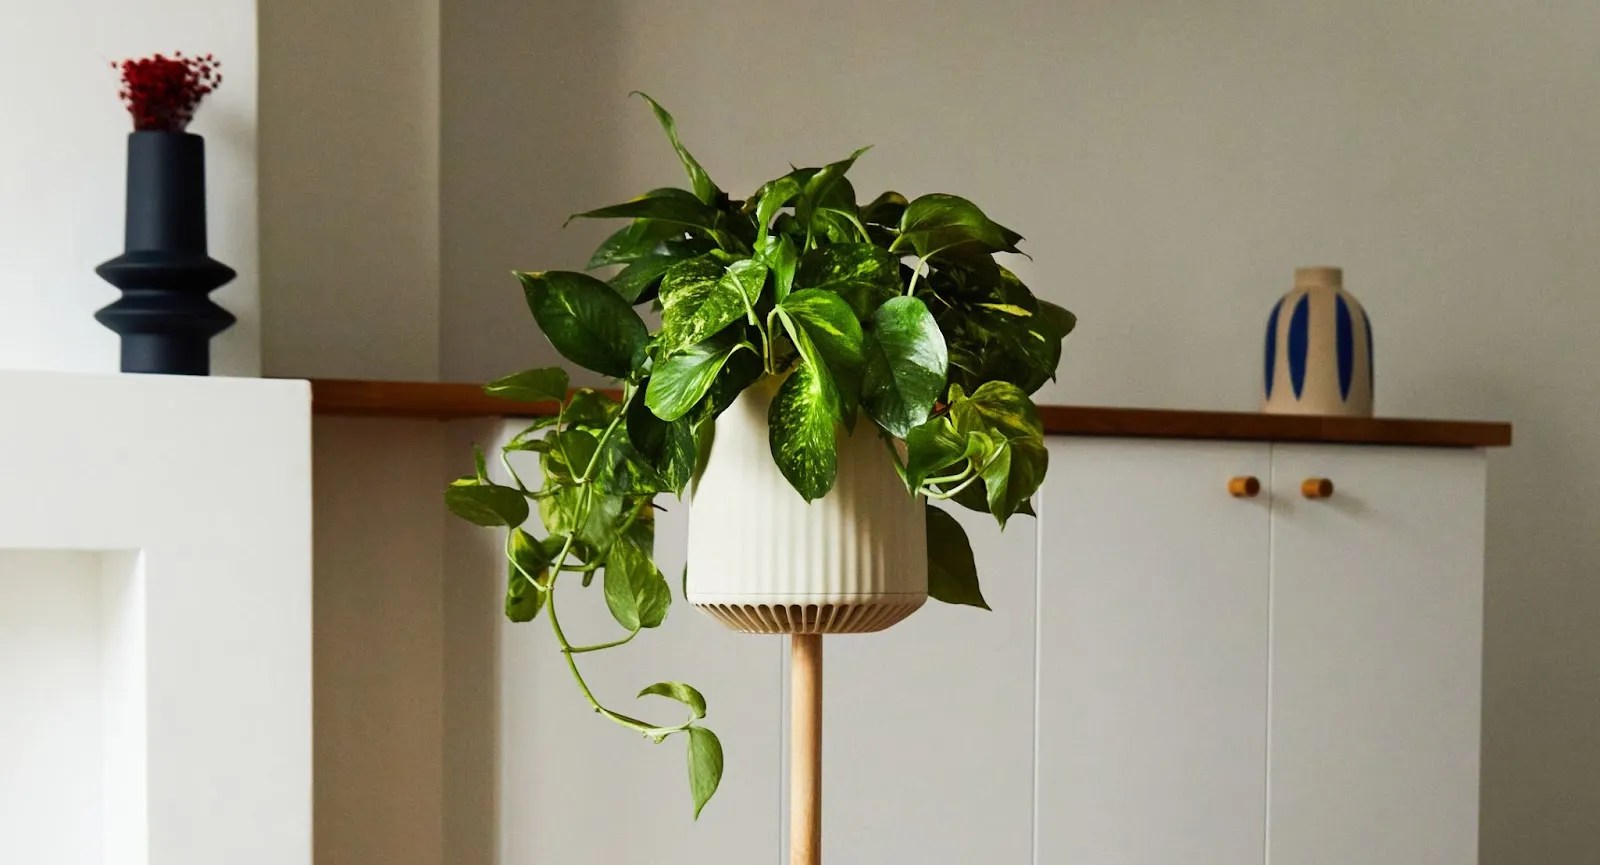 A potted plant on a wooden stand in a living room.